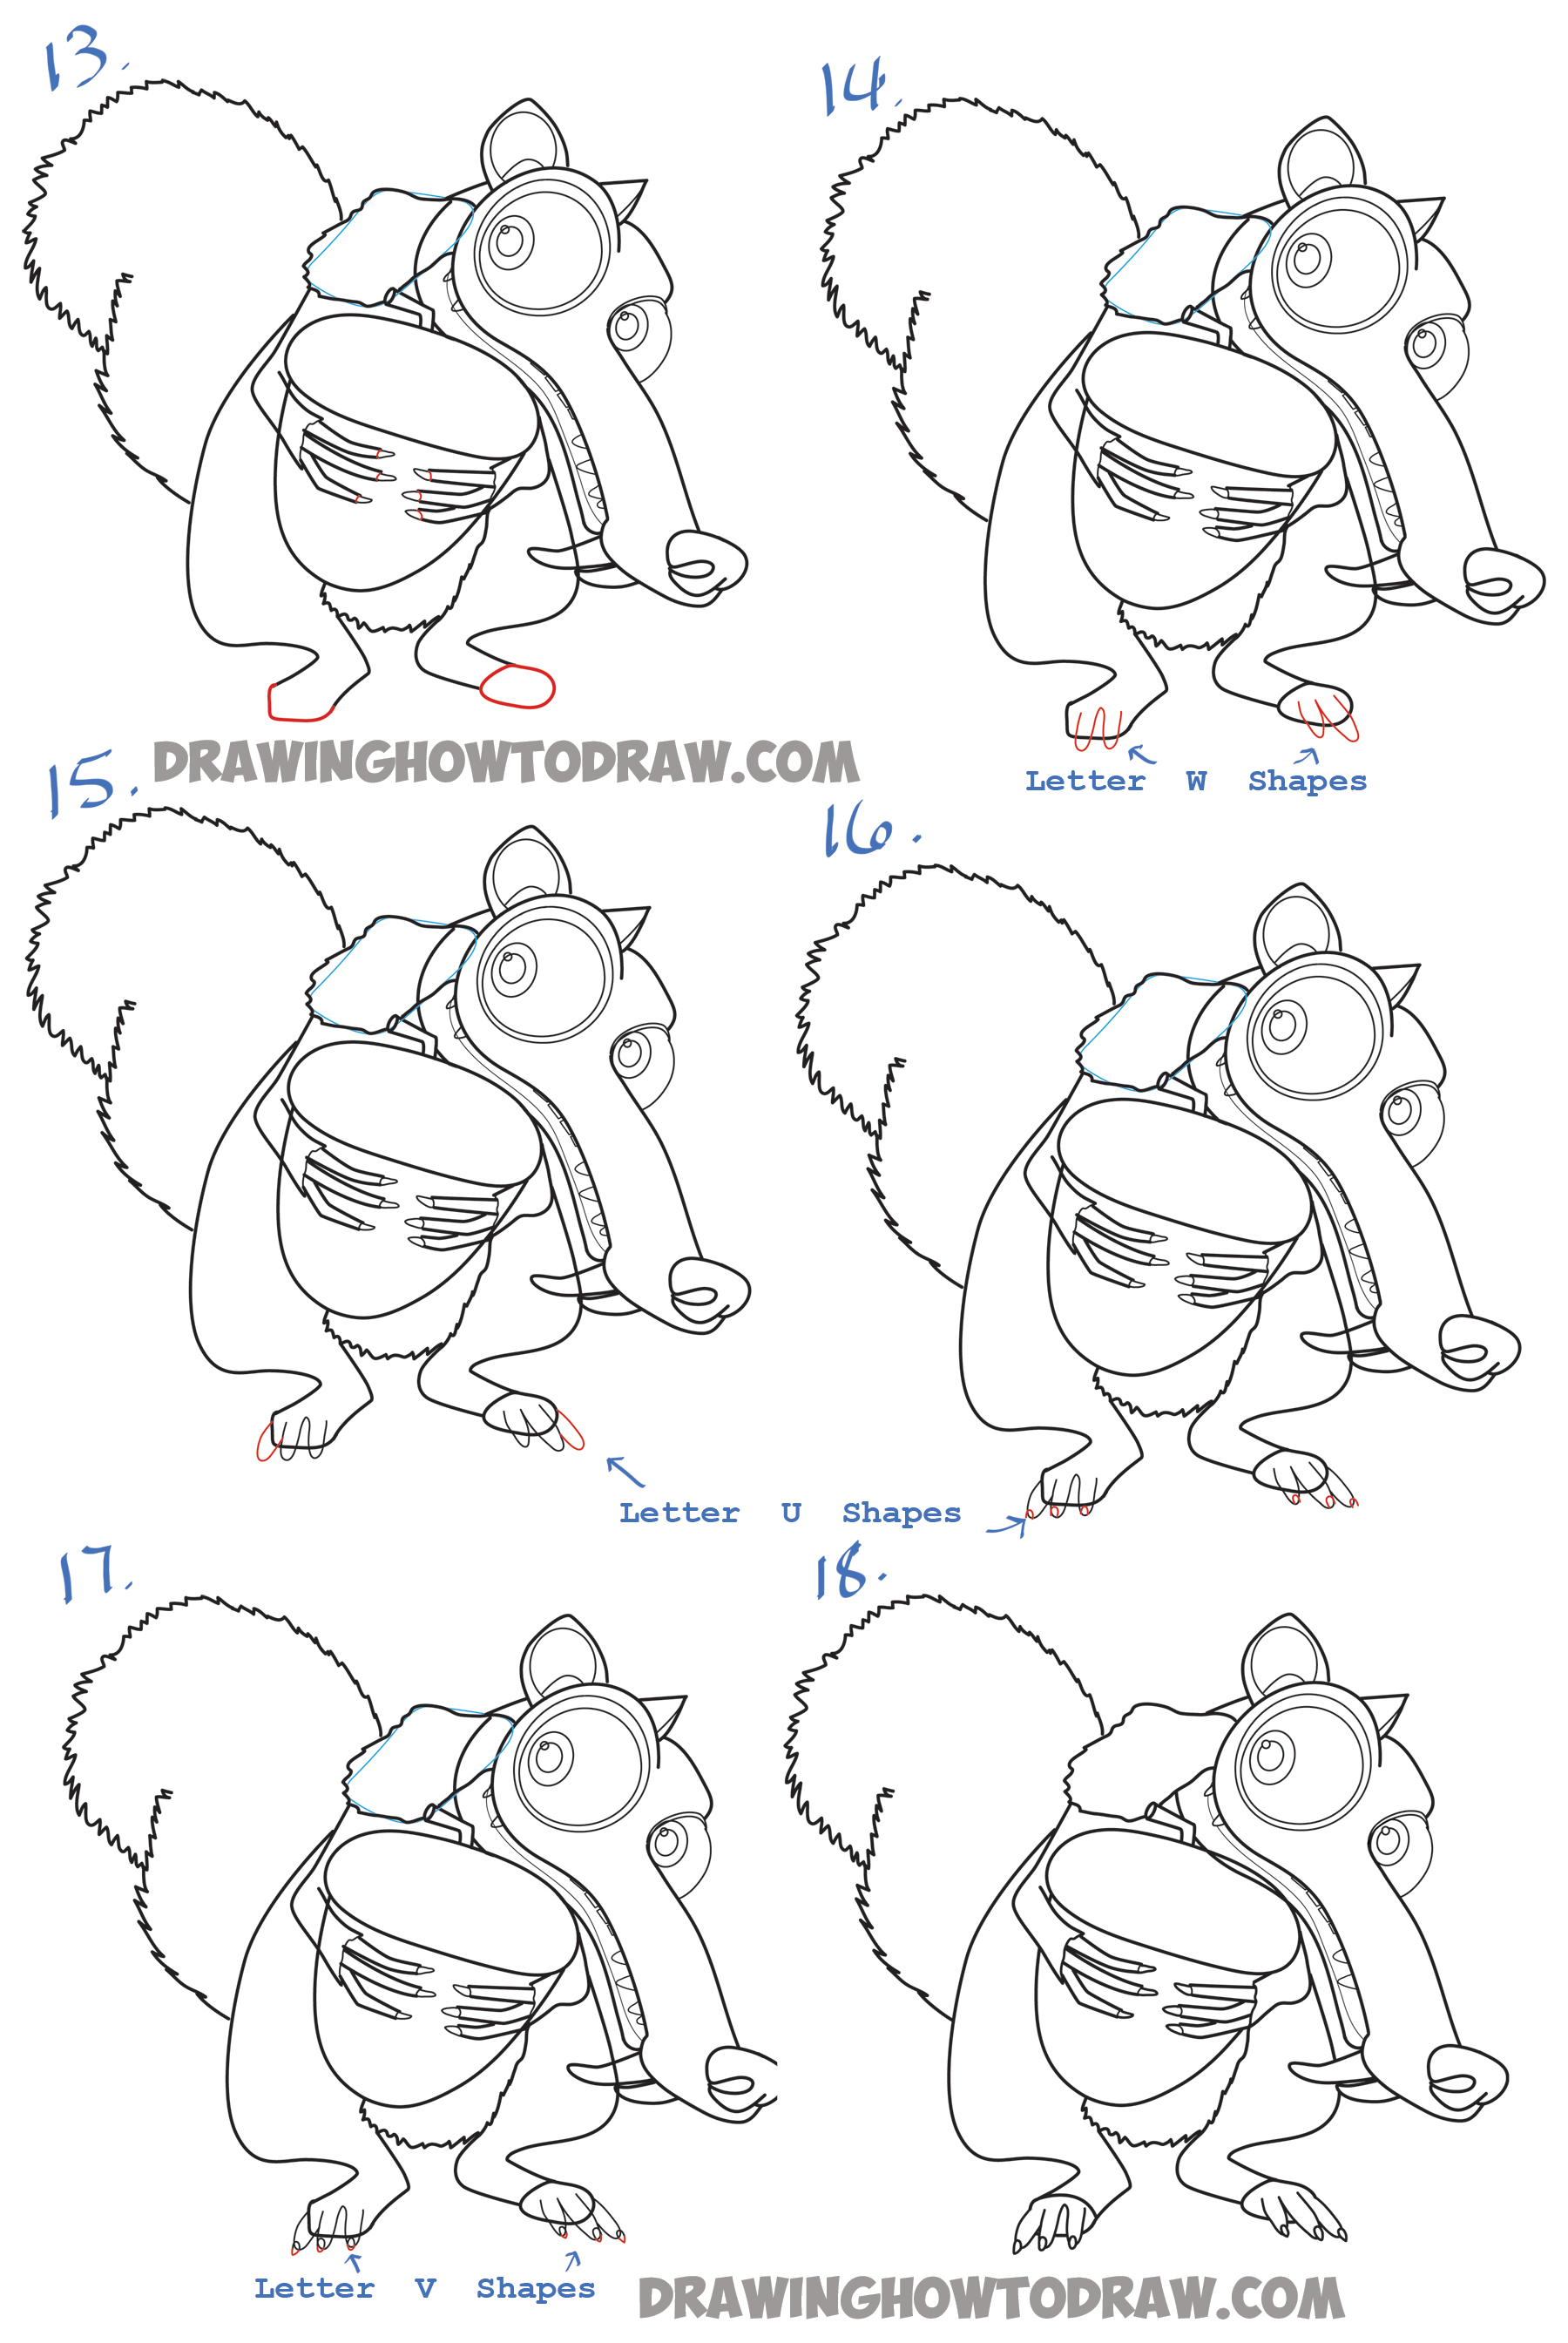 How to draw a cute squirrel easy step by step - YouTube